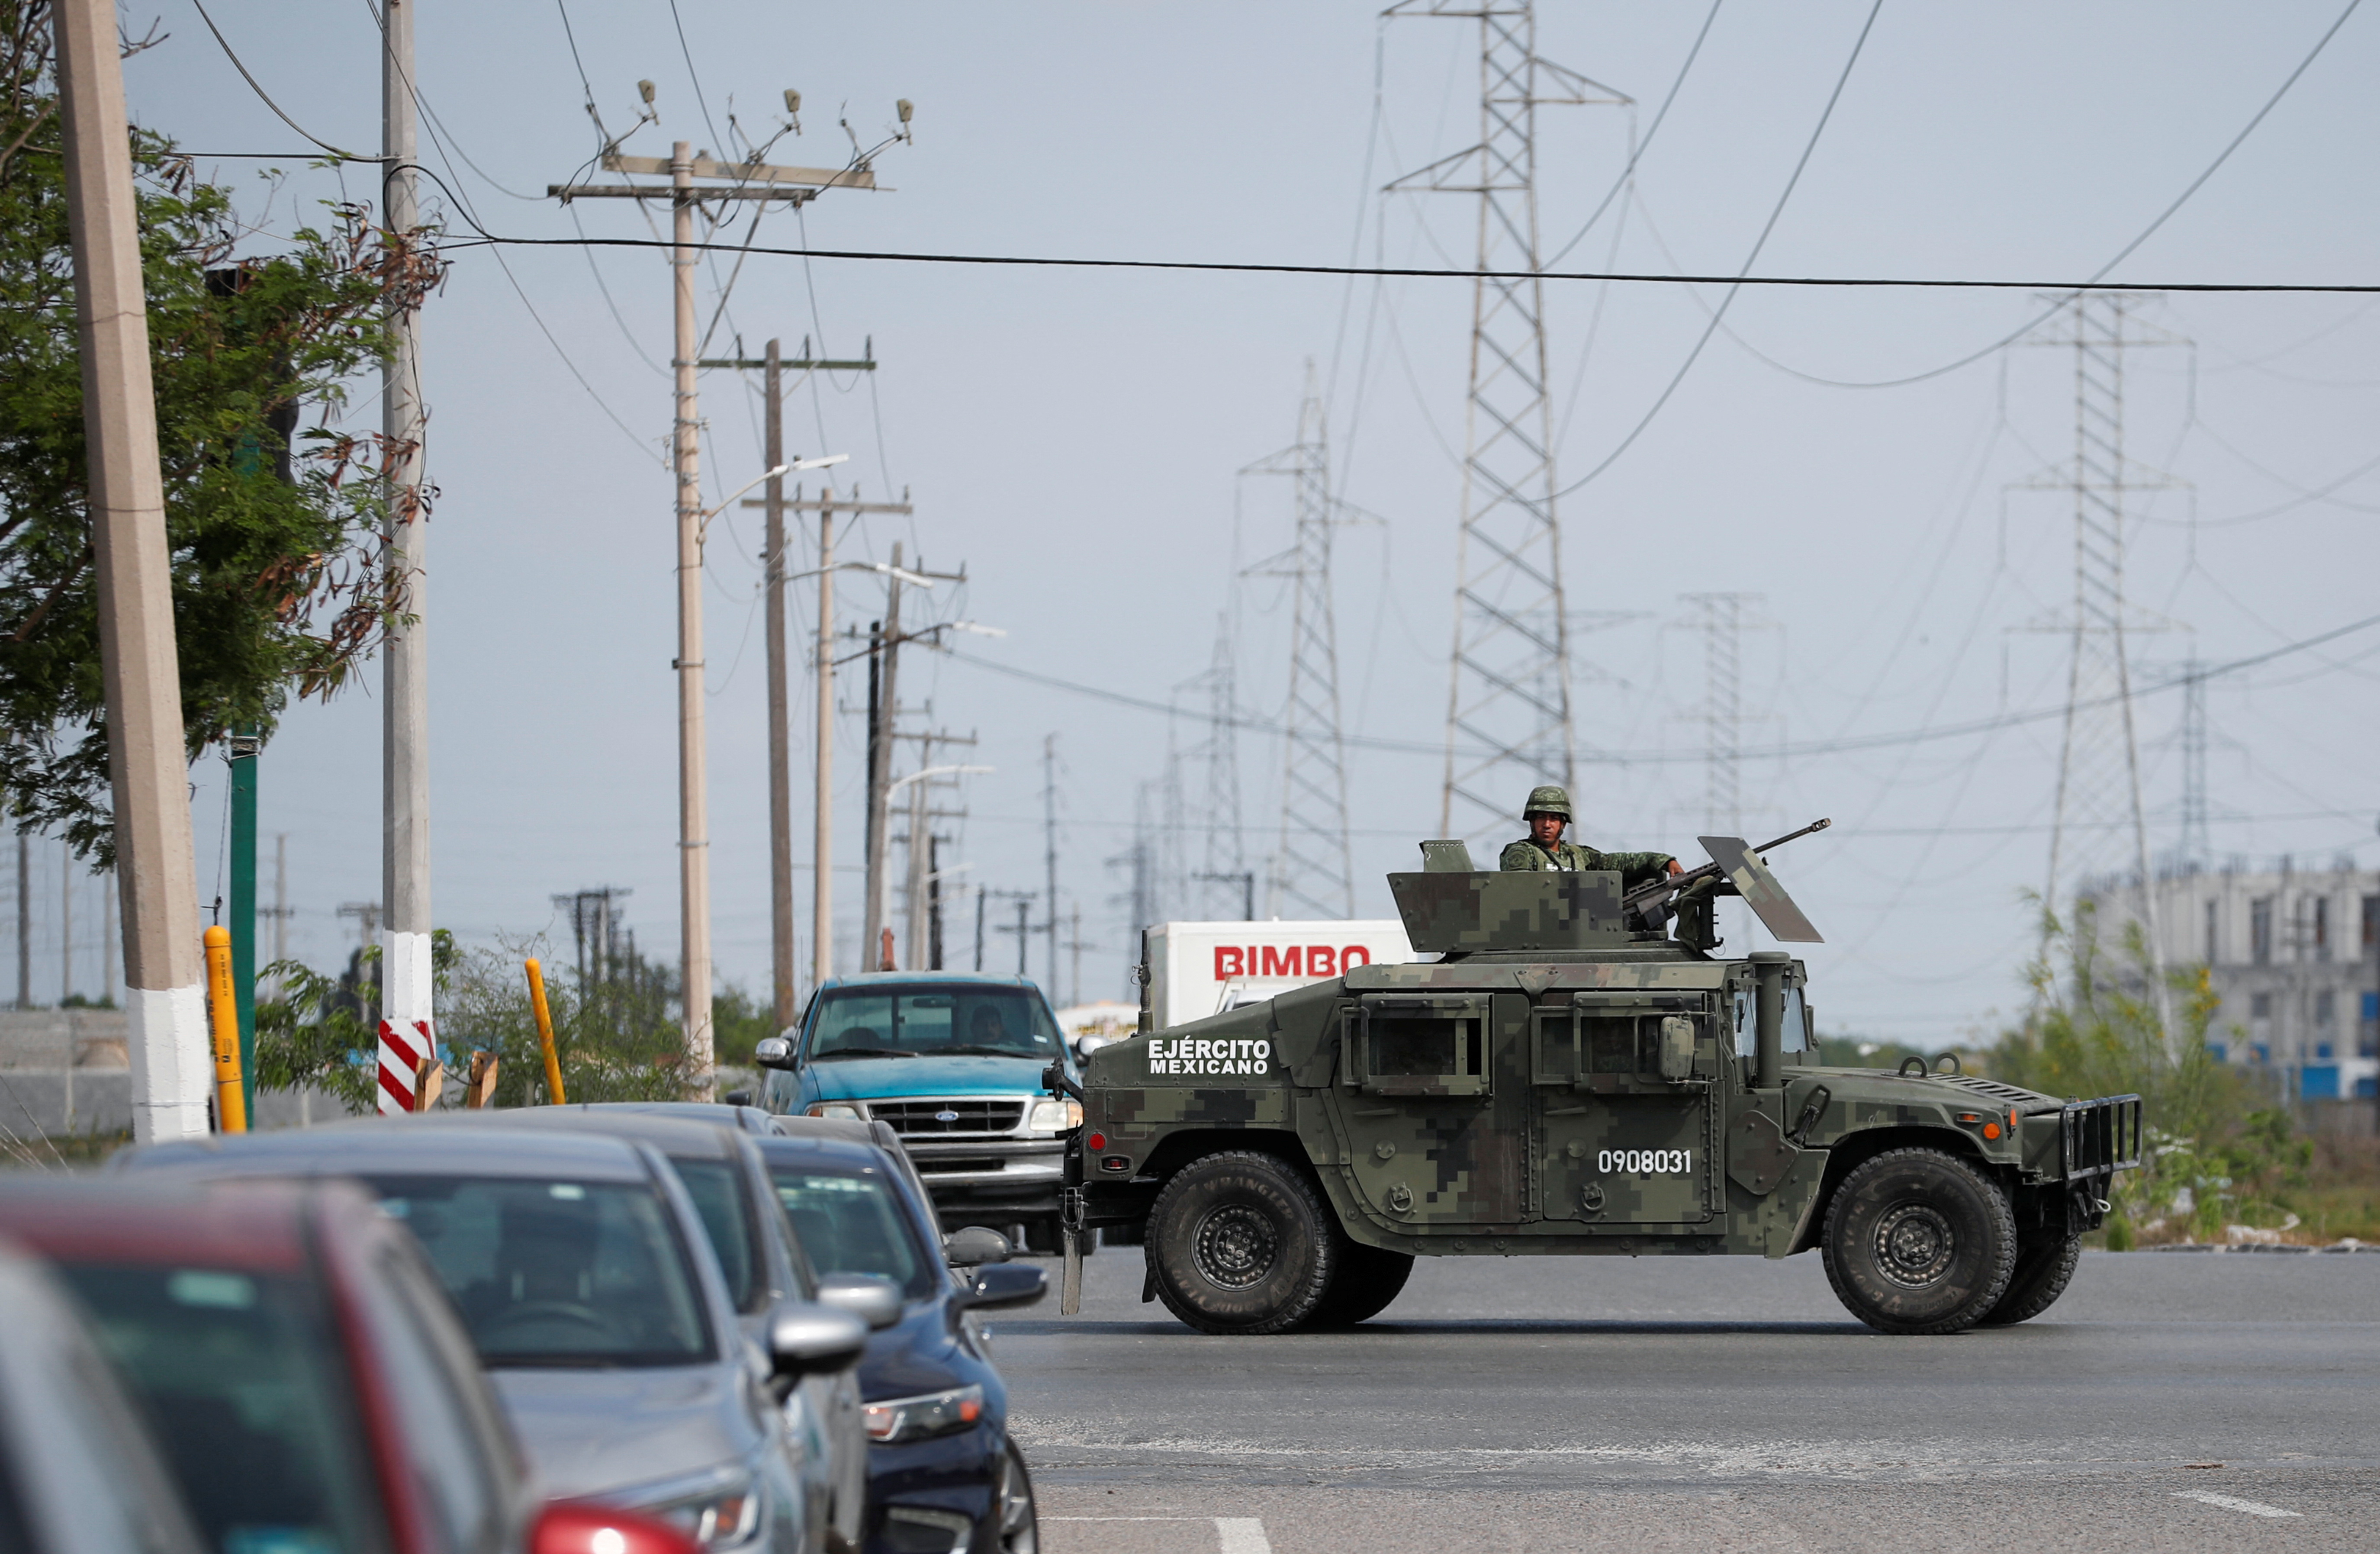 Soldiers patrol near the Forensic Medical Service morgue building ahead of the transfer of the bodies of two of four Americans kidnapped by gunmen to the U.S. border, in Matamoros, Mexico, March 9, 2023. REUTERS/Daniel Becerril